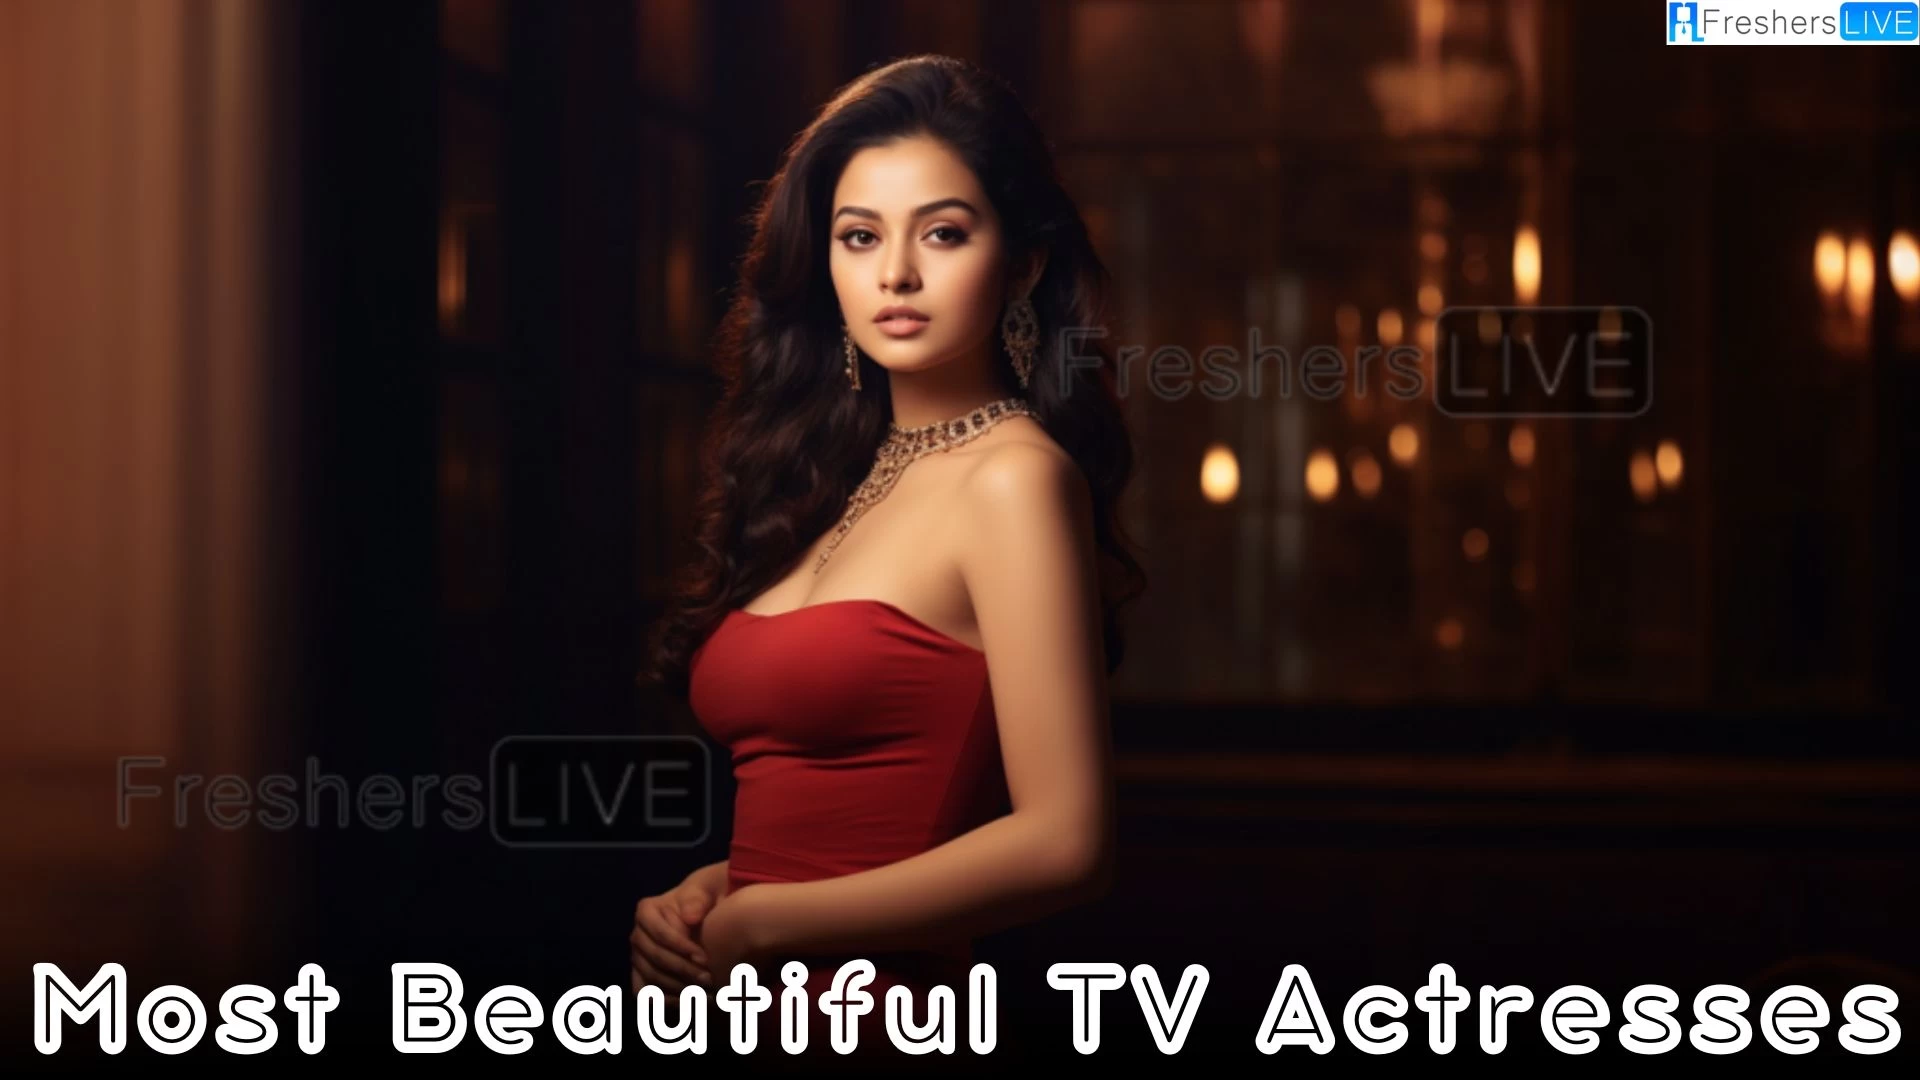 Most beautiful TV Actresses - Top 10 Known For Talent and Charisma